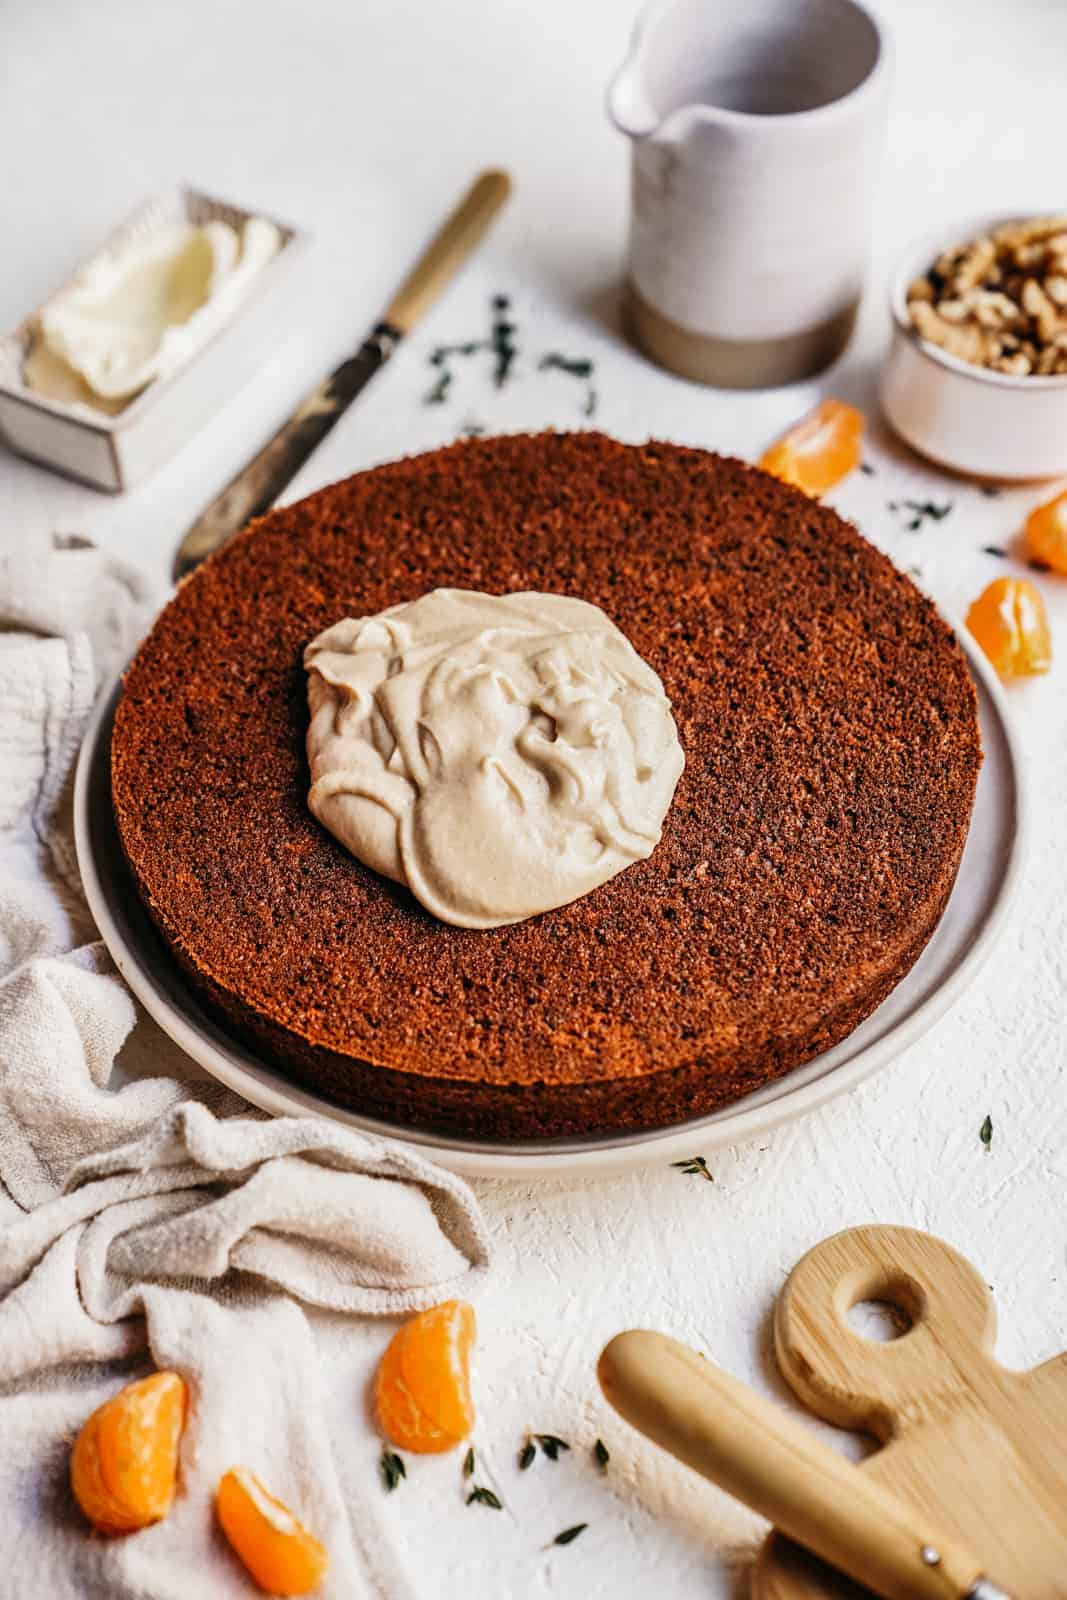 Cashew icing being spread on top of this Vegan Carrot Cake recipe.